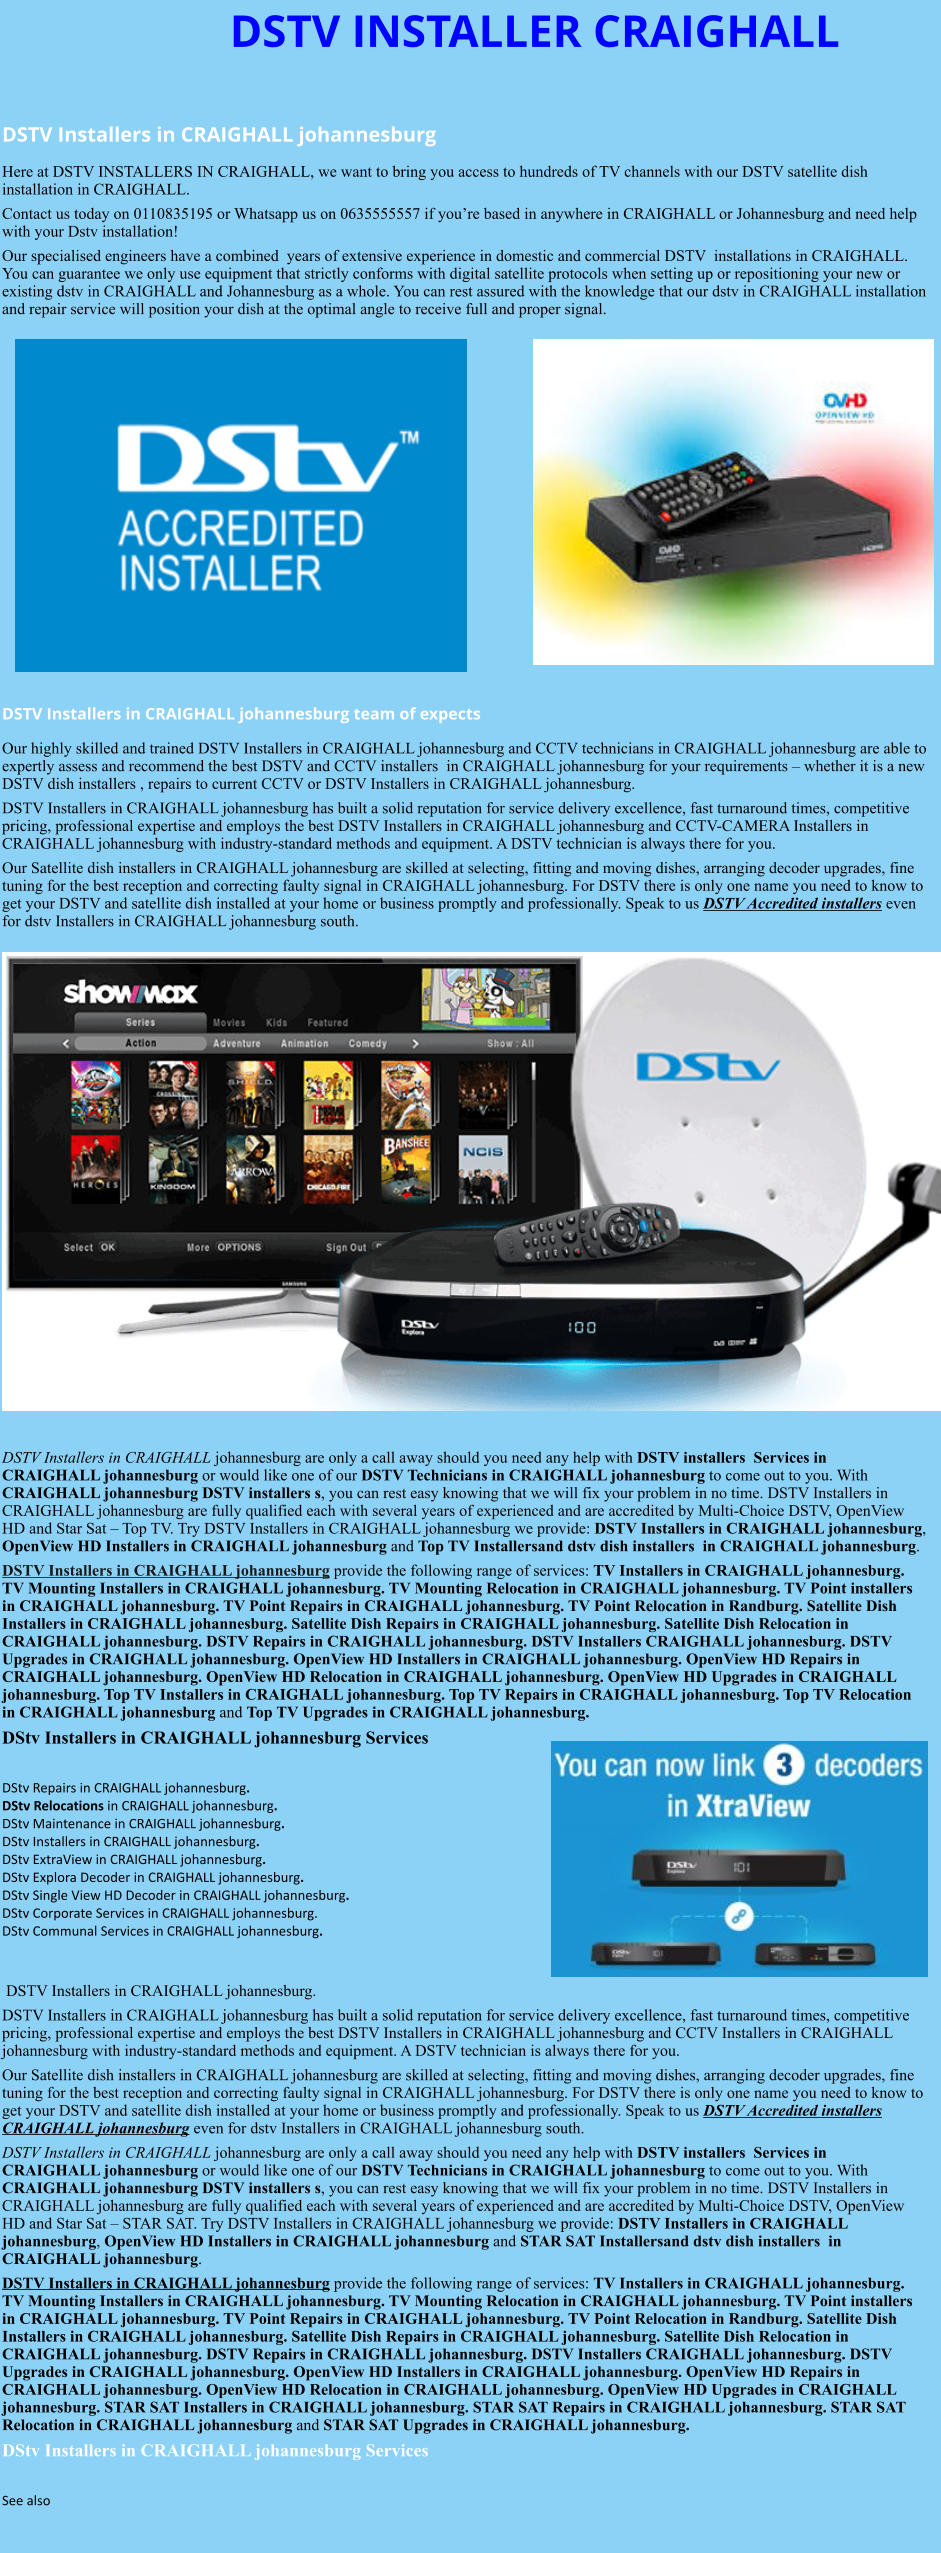 DSTV INSTALLER CRAIGHALL  DSTV Installers in CRAIGHALL johannesburg  Here at DSTV INSTALLERS IN CRAIGHALL, we want to bring you access to hundreds of TV channels with our DSTV satellite dish installation in CRAIGHALL. Contact us today on 0110835195 or Whatsapp us on 0635555557 if you’re based in anywhere in CRAIGHALL or Johannesburg and need help with your Dstv installation! Our specialised engineers have a combined  years of extensive experience in domestic and commercial DSTV  installations in CRAIGHALL. You can guarantee we only use equipment that strictly conforms with digital satellite protocols when setting up or repositioning your new or existing dstv in CRAIGHALL and Johannesburg as a whole. You can rest assured with the knowledge that our dstv in CRAIGHALL installation and repair service will position your dish at the optimal angle to receive full and proper signal.                DSTV Installers in CRAIGHALL johannesburg team of expects Our highly skilled and trained DSTV Installers in CRAIGHALL johannesburg and CCTV technicians in CRAIGHALL johannesburg are able to expertly assess and recommend the best DSTV and CCTV installers  in CRAIGHALL johannesburg for your requirements – whether it is a new DSTV dish installers , repairs to current CCTV or DSTV Installers in CRAIGHALL johannesburg. DSTV Installers in CRAIGHALL johannesburg has built a solid reputation for service delivery excellence, fast turnaround times, competitive pricing, professional expertise and employs the best DSTV Installers in CRAIGHALL johannesburg and CCTV-CAMERA Installers in CRAIGHALL johannesburg with industry-standard methods and equipment. A DSTV technician is always there for you. Our Satellite dish installers in CRAIGHALL johannesburg are skilled at selecting, fitting and moving dishes, arranging decoder upgrades, fine tuning for the best reception and correcting faulty signal in CRAIGHALL johannesburg. For DSTV there is only one name you need to know to get your DSTV and satellite dish installed at your home or business promptly and professionally. Speak to us DSTV Accredited installers even for dstv Installers in CRAIGHALL johannesburg south.                      DSTV Installers in CRAIGHALL johannesburg are only a call away should you need any help with DSTV installers  Services in CRAIGHALL johannesburg or would like one of our DSTV Technicians in CRAIGHALL johannesburg to come out to you. With CRAIGHALL johannesburg DSTV installers s, you can rest easy knowing that we will fix your problem in no time. DSTV Installers in CRAIGHALL johannesburg are fully qualified each with several years of experienced and are accredited by Multi-Choice DSTV, OpenView HD and Star Sat – Top TV. Try DSTV Installers in CRAIGHALL johannesburg we provide: DSTV Installers in CRAIGHALL johannesburg, OpenView HD Installers in CRAIGHALL johannesburg and Top TV Installersand dstv dish installers  in CRAIGHALL johannesburg. DSTV Installers in CRAIGHALL johannesburg provide the following range of services: TV Installers in CRAIGHALL johannesburg. TV Mounting Installers in CRAIGHALL johannesburg. TV Mounting Relocation in CRAIGHALL johannesburg. TV Point installers  in CRAIGHALL johannesburg. TV Point Repairs in CRAIGHALL johannesburg. TV Point Relocation in Randburg. Satellite Dish Installers in CRAIGHALL johannesburg. Satellite Dish Repairs in CRAIGHALL johannesburg. Satellite Dish Relocation in CRAIGHALL johannesburg. DSTV Repairs in CRAIGHALL johannesburg. DSTV Installers CRAIGHALL johannesburg. DSTV Upgrades in CRAIGHALL johannesburg. OpenView HD Installers in CRAIGHALL johannesburg. OpenView HD Repairs in CRAIGHALL johannesburg. OpenView HD Relocation in CRAIGHALL johannesburg. OpenView HD Upgrades in CRAIGHALL johannesburg. Top TV Installers in CRAIGHALL johannesburg. Top TV Repairs in CRAIGHALL johannesburg. Top TV Relocation in CRAIGHALL johannesburg and Top TV Upgrades in CRAIGHALL johannesburg. DStv Installers in CRAIGHALL johannesburg Services  DStv Repairs in CRAIGHALL johannesburg.  DStv Relocations in CRAIGHALL johannesburg.  DStv Maintenance in CRAIGHALL johannesburg. DStv Installers in CRAIGHALL johannesburg. DStv ExtraView in CRAIGHALL johannesburg. DStv Explora Decoder in CRAIGHALL johannesburg. DStv Single View HD Decoder in CRAIGHALL johannesburg. DStv Corporate Services in CRAIGHALL johannesburg. DStv Communal Services in CRAIGHALL johannesburg.    DSTV Installers in CRAIGHALL johannesburg. DSTV Installers in CRAIGHALL johannesburg has built a solid reputation for service delivery excellence, fast turnaround times, competitive pricing, professional expertise and employs the best DSTV Installers in CRAIGHALL johannesburg and CCTV Installers in CRAIGHALL johannesburg with industry-standard methods and equipment. A DSTV technician is always there for you. Our Satellite dish installers in CRAIGHALL johannesburg are skilled at selecting, fitting and moving dishes, arranging decoder upgrades, fine tuning for the best reception and correcting faulty signal in CRAIGHALL johannesburg. For DSTV there is only one name you need to know to get your DSTV and satellite dish installed at your home or business promptly and professionally. Speak to us DSTV Accredited installers CRAIGHALL johannesburg even for dstv Installers in CRAIGHALL johannesburg south. DSTV Installers in CRAIGHALL johannesburg are only a call away should you need any help with DSTV installers  Services in CRAIGHALL johannesburg or would like one of our DSTV Technicians in CRAIGHALL johannesburg to come out to you. With CRAIGHALL johannesburg DSTV installers s, you can rest easy knowing that we will fix your problem in no time. DSTV Installers in CRAIGHALL johannesburg are fully qualified each with several years of experienced and are accredited by Multi-Choice DSTV, OpenView HD and Star Sat – STAR SAT. Try DSTV Installers in CRAIGHALL johannesburg we provide: DSTV Installers in CRAIGHALL johannesburg, OpenView HD Installers in CRAIGHALL johannesburg and STAR SAT Installersand dstv dish installers  in CRAIGHALL johannesburg. DSTV Installers in CRAIGHALL johannesburg provide the following range of services: TV Installers in CRAIGHALL johannesburg. TV Mounting Installers in CRAIGHALL johannesburg. TV Mounting Relocation in CRAIGHALL johannesburg. TV Point installers  in CRAIGHALL johannesburg. TV Point Repairs in CRAIGHALL johannesburg. TV Point Relocation in Randburg. Satellite Dish Installers in CRAIGHALL johannesburg. Satellite Dish Repairs in CRAIGHALL johannesburg. Satellite Dish Relocation in CRAIGHALL johannesburg. DSTV Repairs in CRAIGHALL johannesburg. DSTV Installers CRAIGHALL johannesburg. DSTV Upgrades in CRAIGHALL johannesburg. OpenView HD Installers in CRAIGHALL johannesburg. OpenView HD Repairs in CRAIGHALL johannesburg. OpenView HD Relocation in CRAIGHALL johannesburg. OpenView HD Upgrades in CRAIGHALL johannesburg. STAR SAT Installers in CRAIGHALL johannesburg. STAR SAT Repairs in CRAIGHALL johannesburg. STAR SAT Relocation in CRAIGHALL johannesburg and STAR SAT Upgrades in CRAIGHALL johannesburg. DStv Installers in CRAIGHALL johannesburg Services  See also